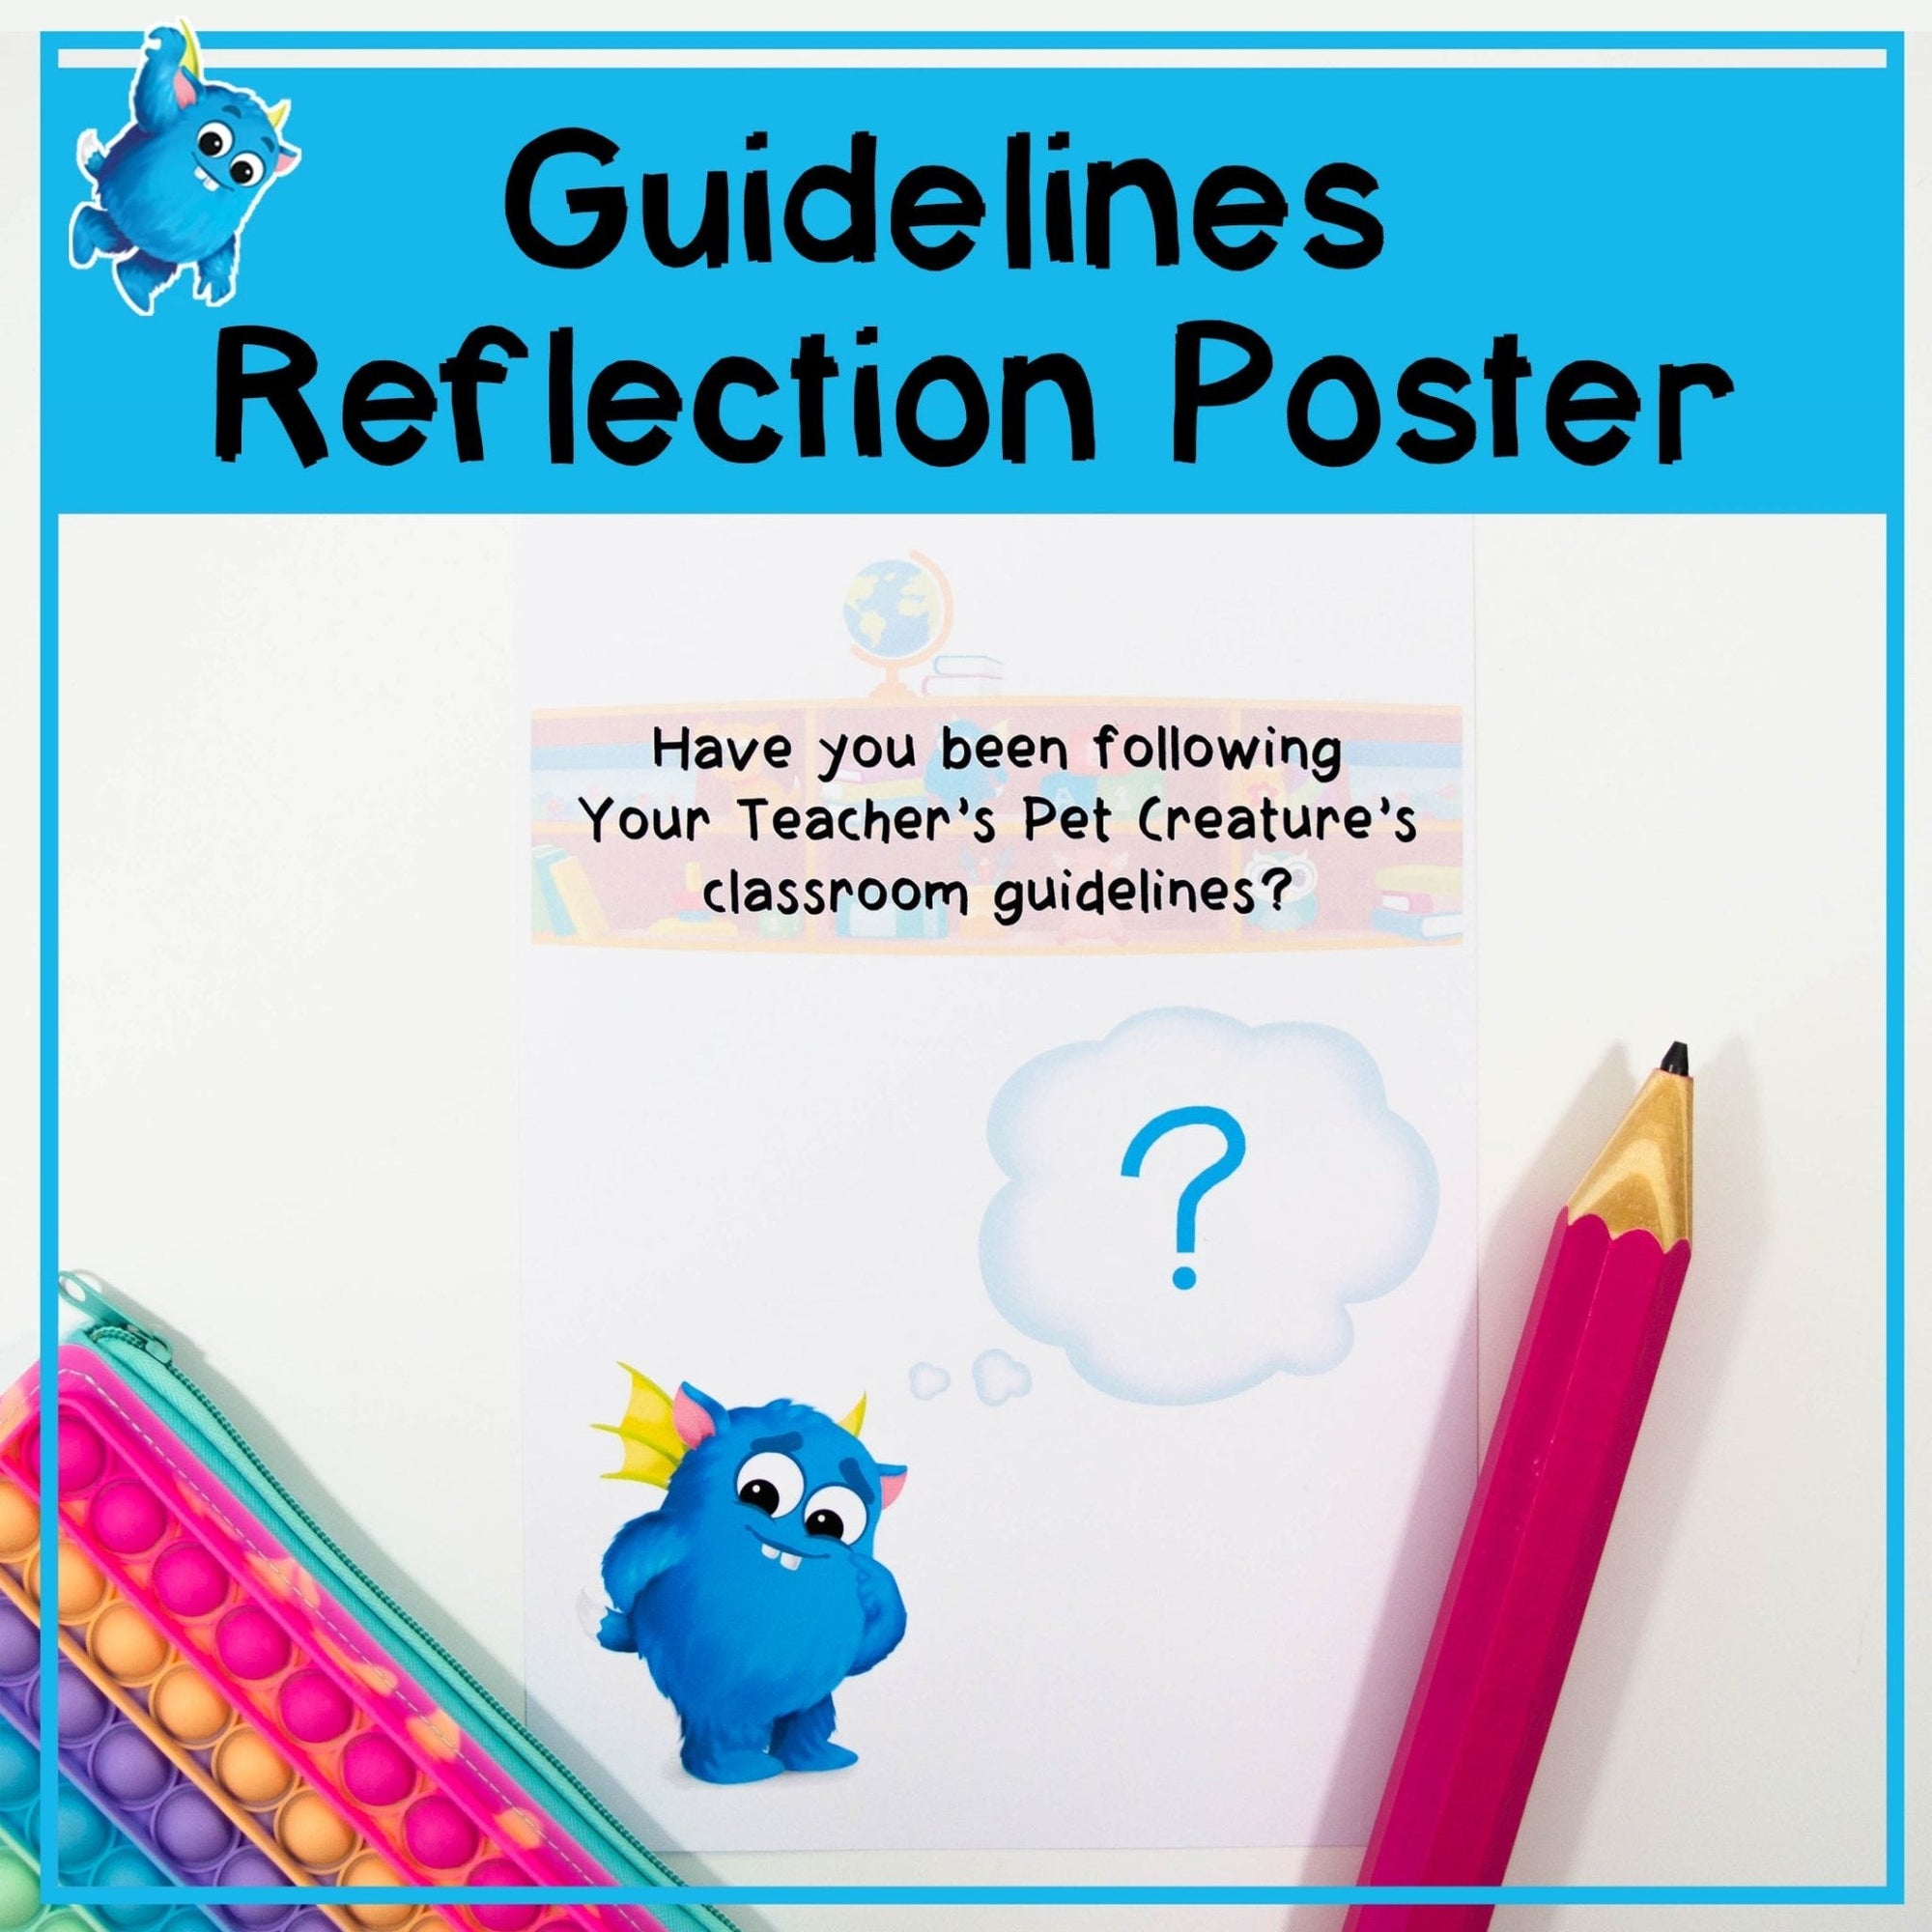 Guidelines Reflection Poster - Your Teacher's Pet Creature